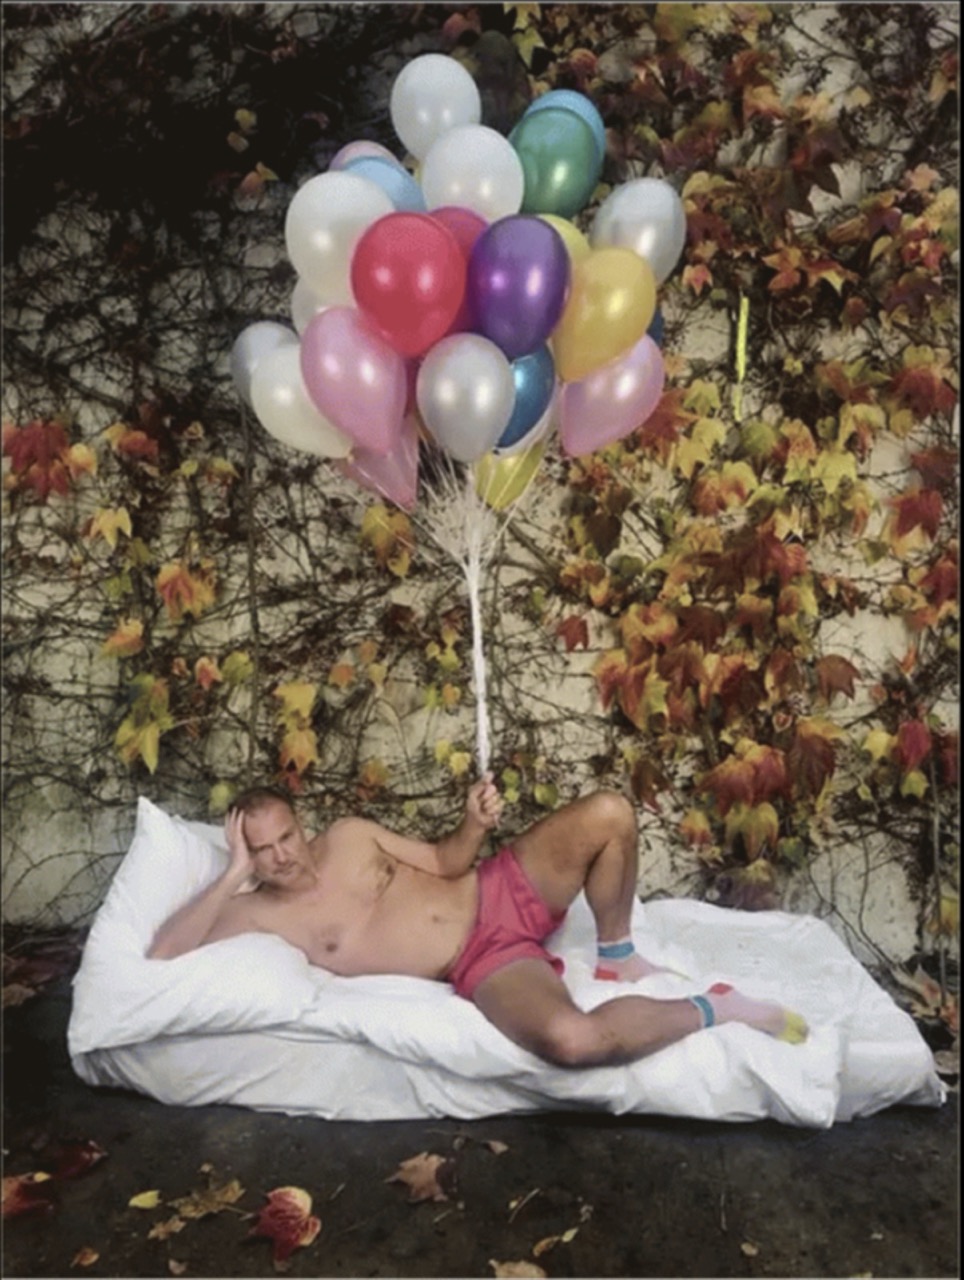 exposition photo paris décembre 2023 Self-Portrait with pink shorts and balloons, Paris 2017 - Juergen Teller (© Juergen Teller, all rights reserved)